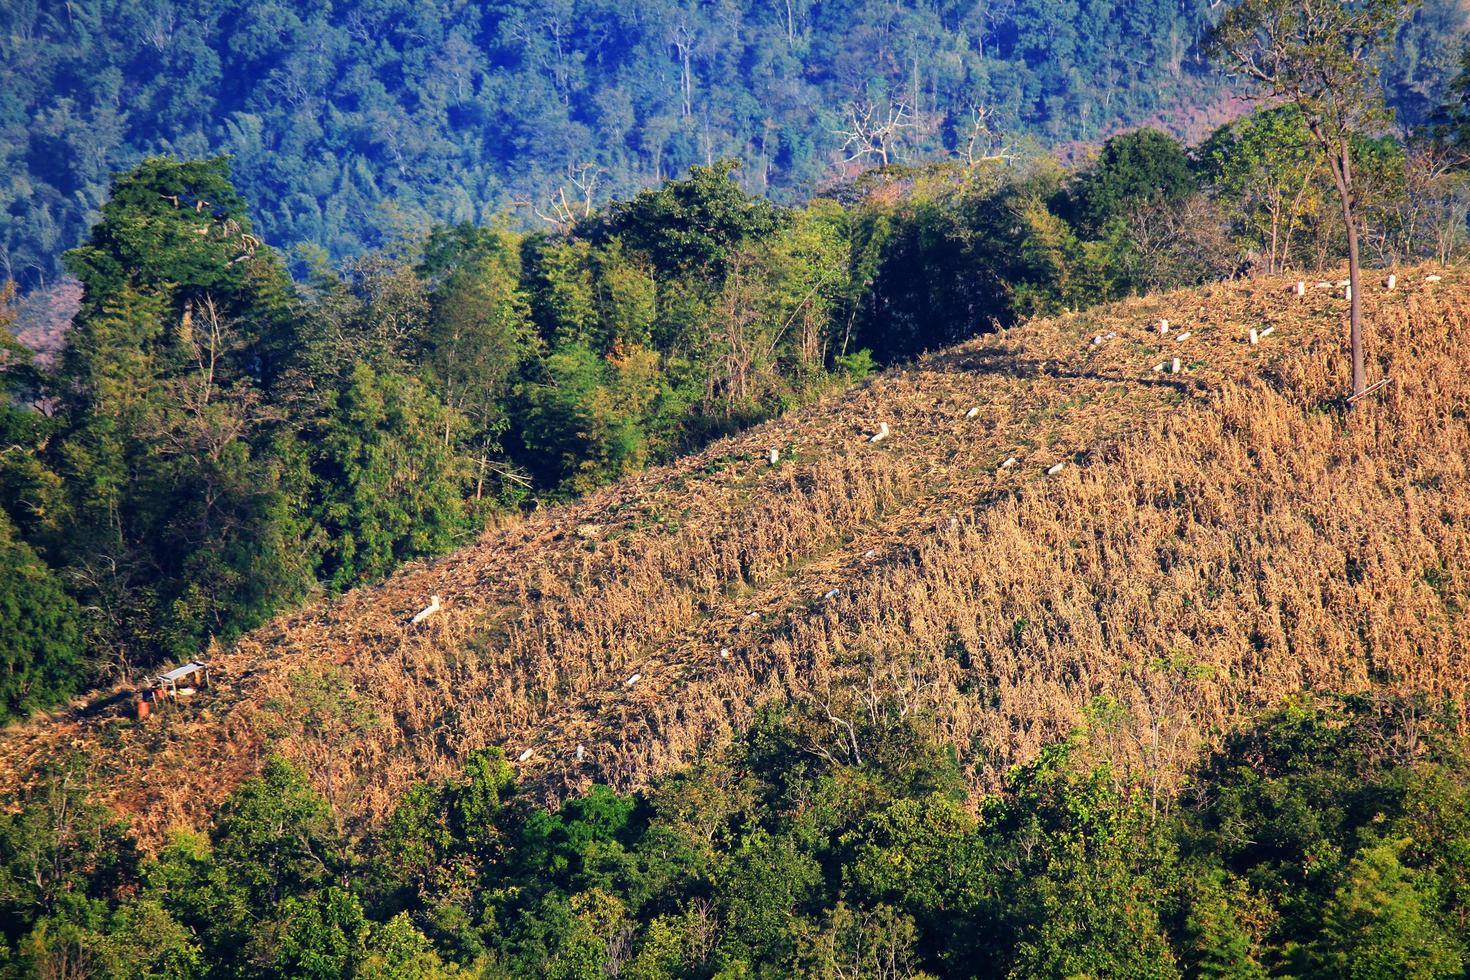 Trouble cutting trees on the mountain for Build resort and Shifting cultivation with Global warming in Thailand and on the earth. photo